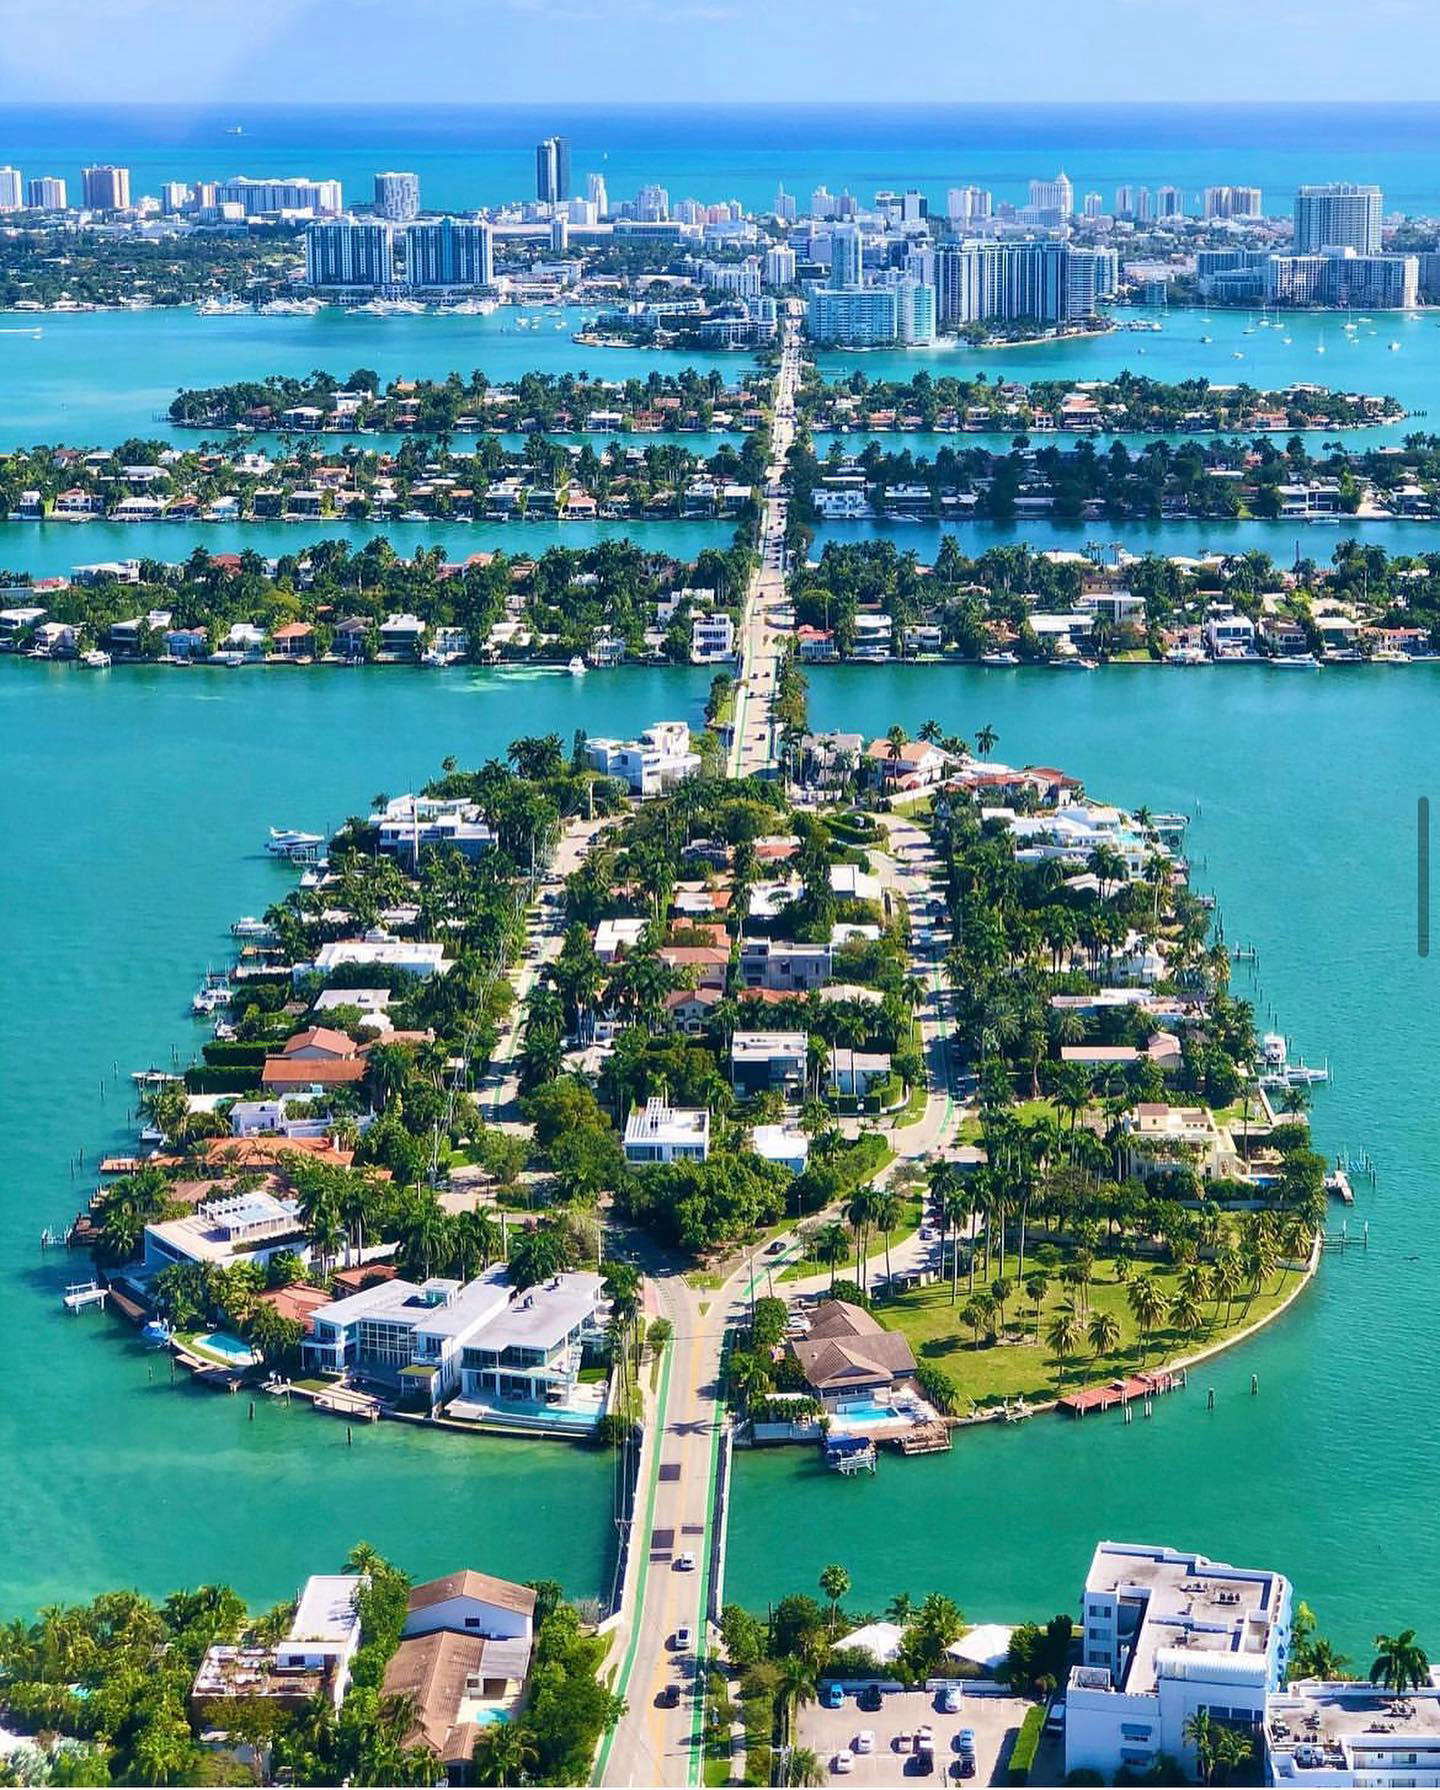 image  1 Miami - The Venetian islands are a chain of artificial islands in Biscayne Bay connecting the mainla